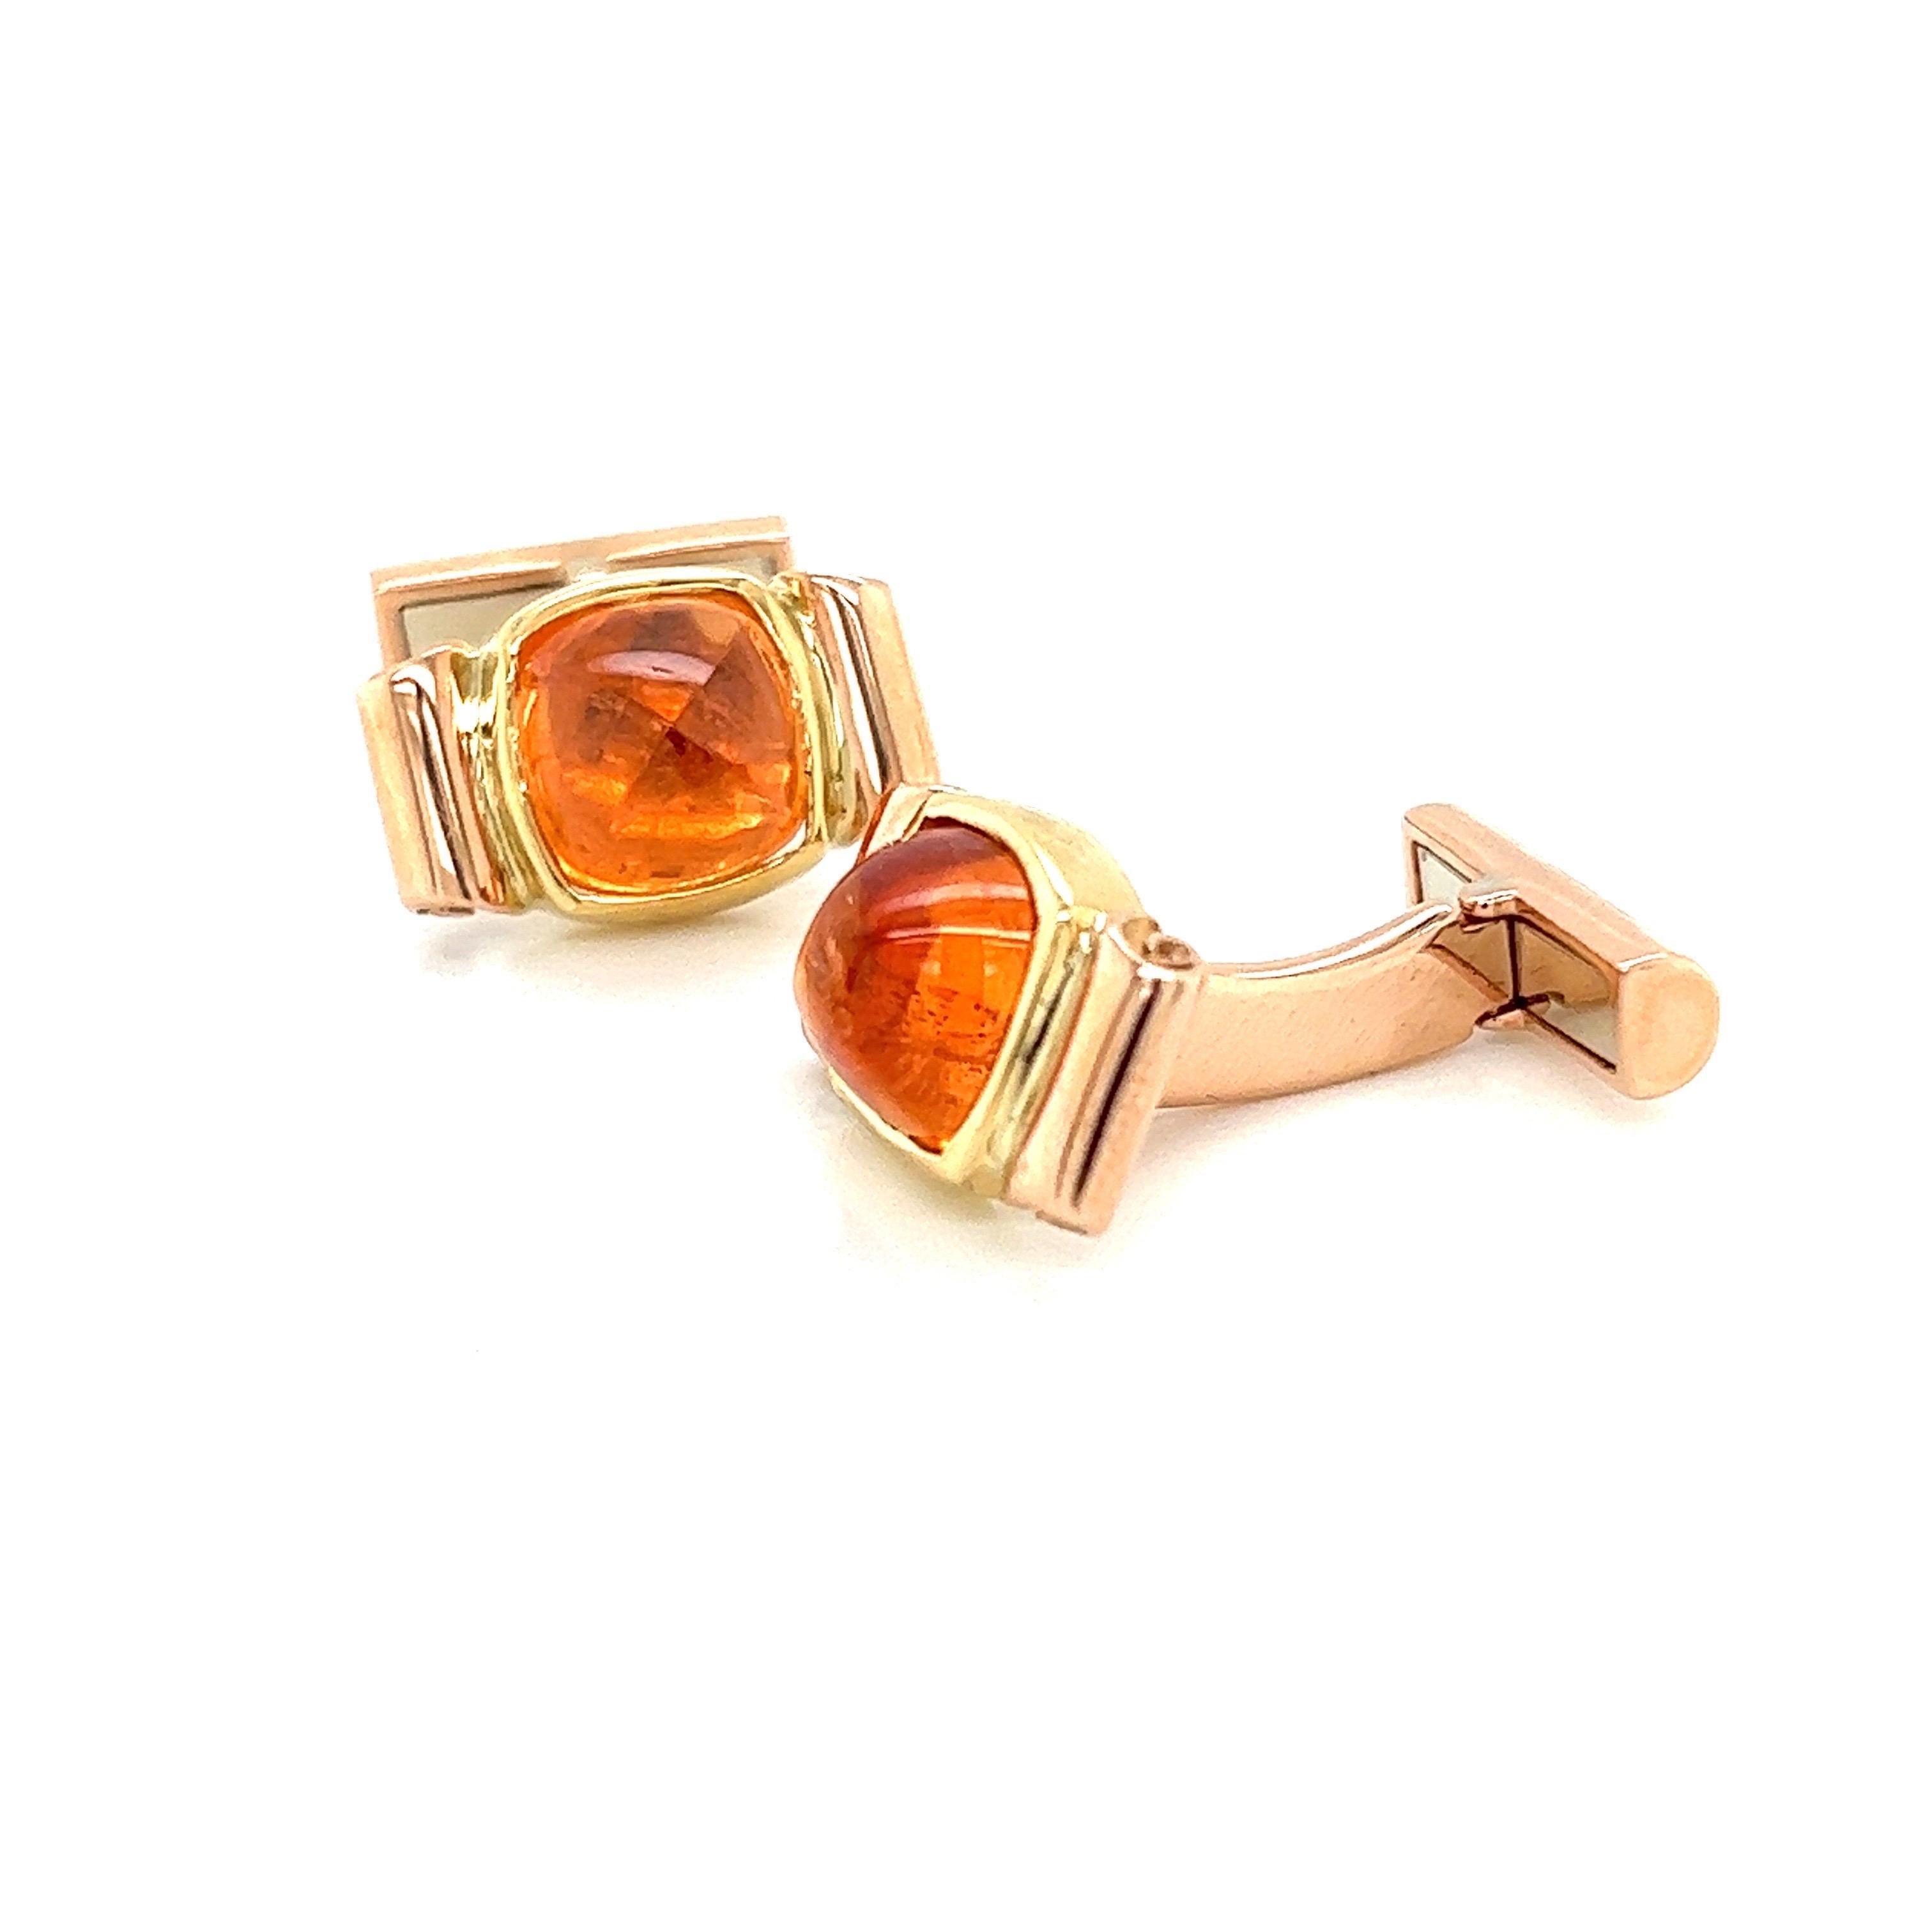 The exquisite 18k Yellow and Rose Gold cufflinks, an opulent blend of elegance and sophistication. These cufflinks are meticulously crafted to captivate the discerning eye, featuring a magnificent cushion-cut Spessartite Orange Garnet at their